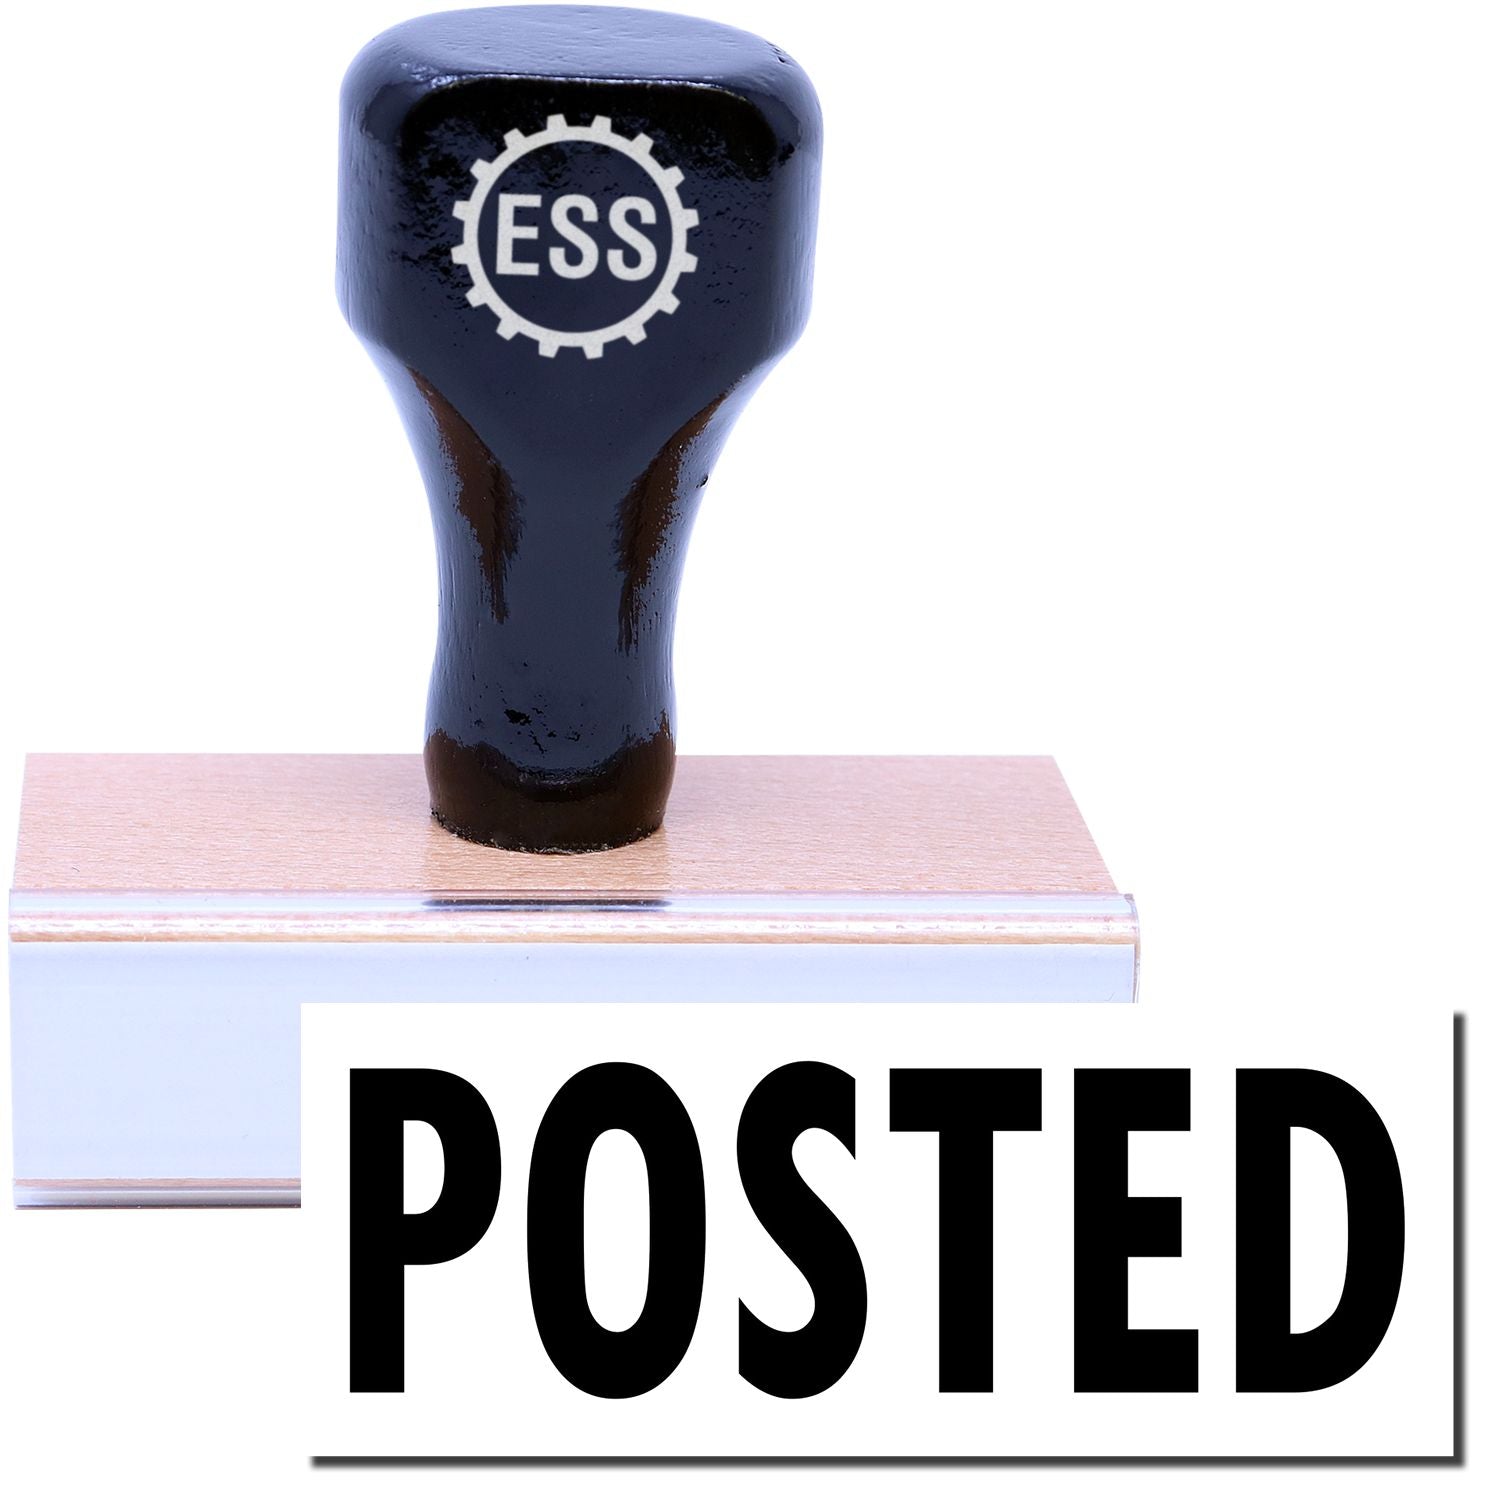 A stock office rubber stamp with a stamped image showing how the text "POSTED" in a large font is displayed after stamping.